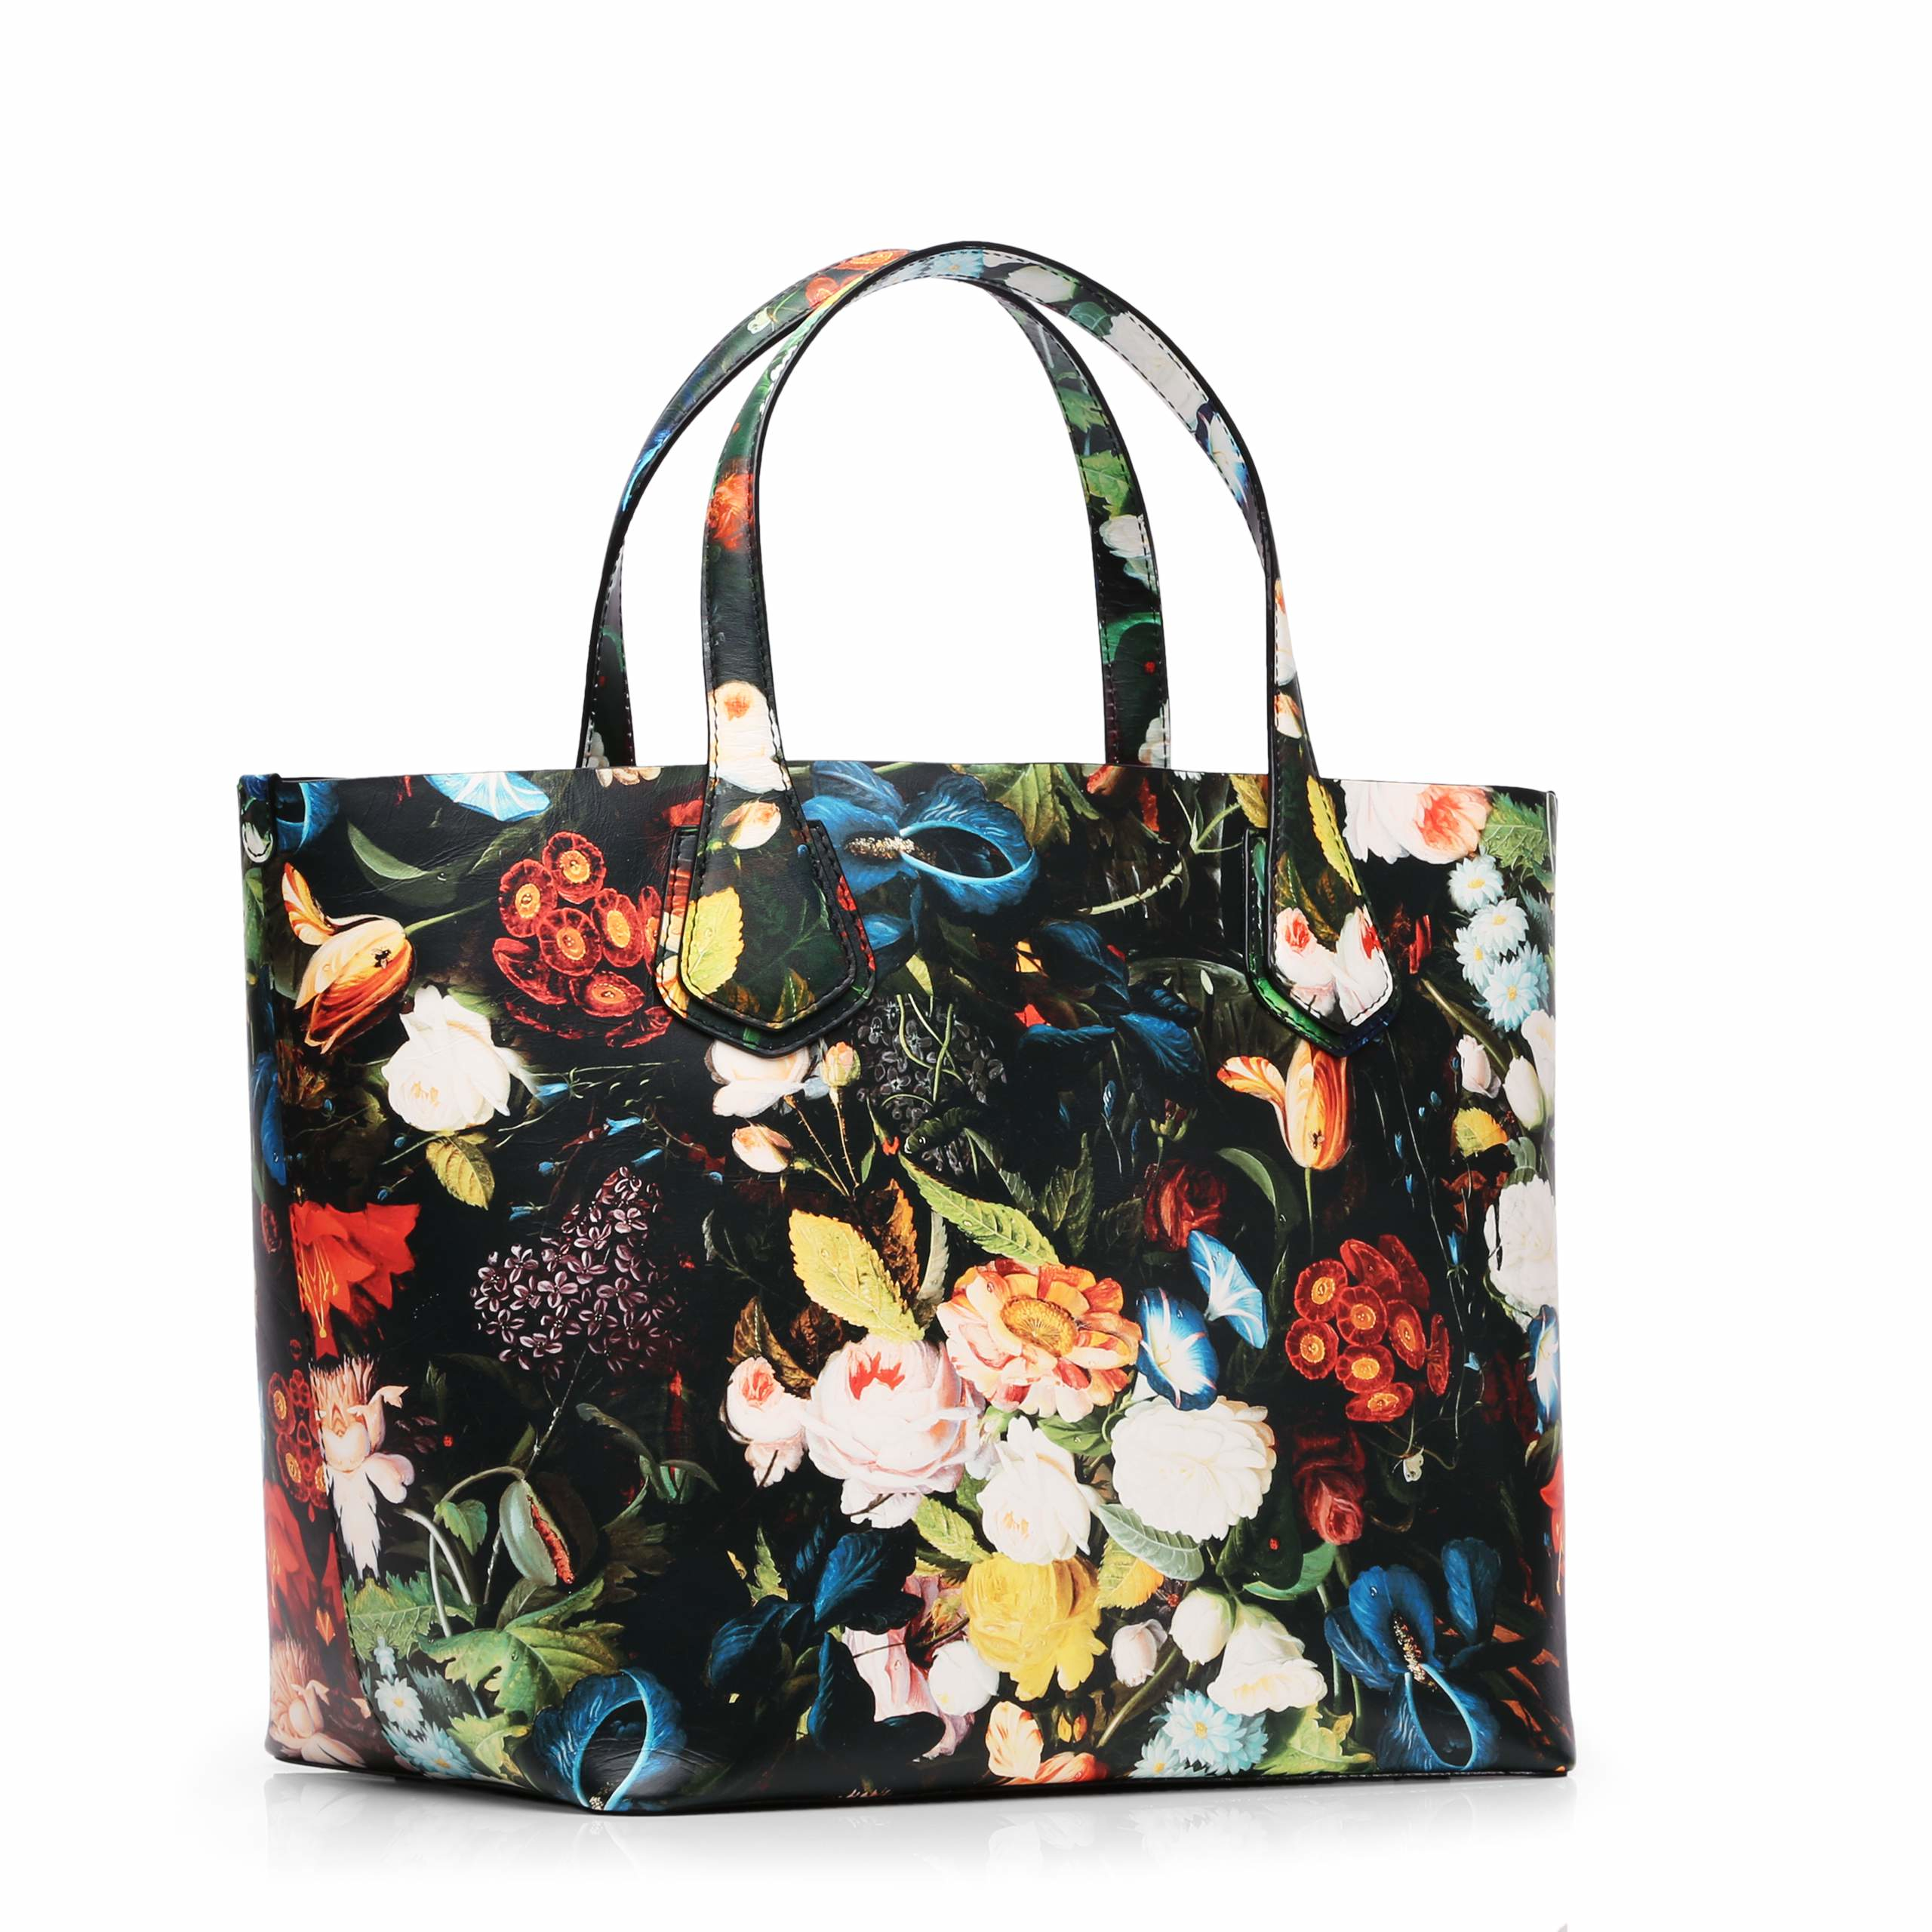 MZ Wallace Brise Flower Jf Tote - Lyst